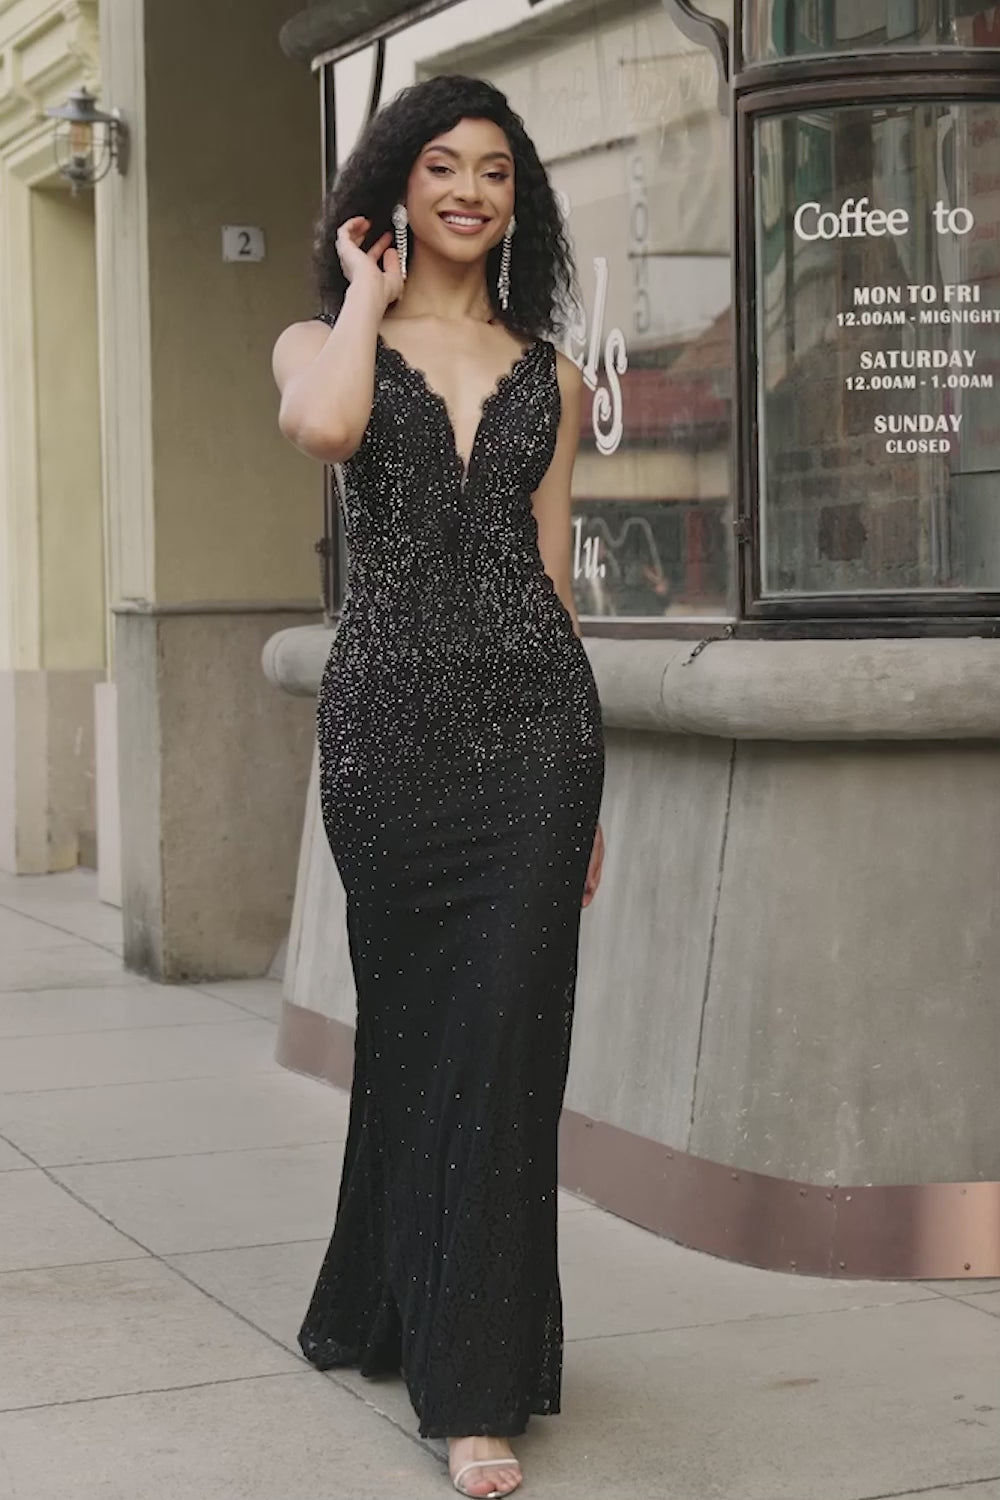 Sparkly Mermaid Deep V Neck Black Lace Long Prom Dress with Beading